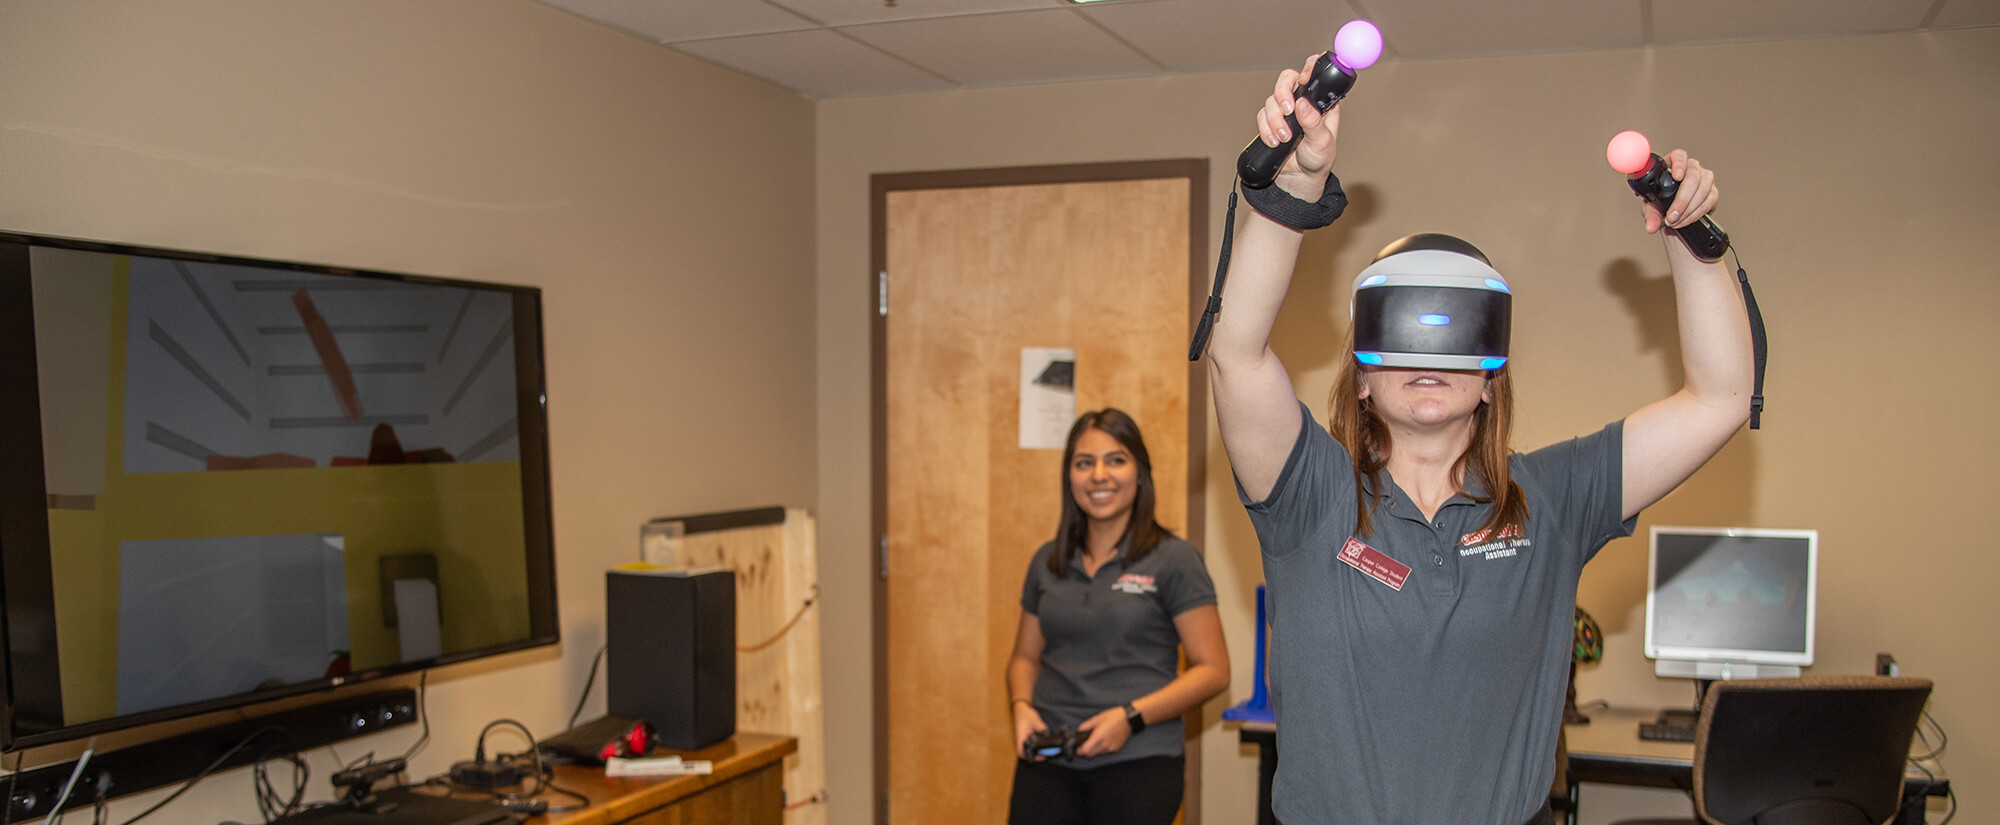 Students use virtual reality to augment their learning experience.